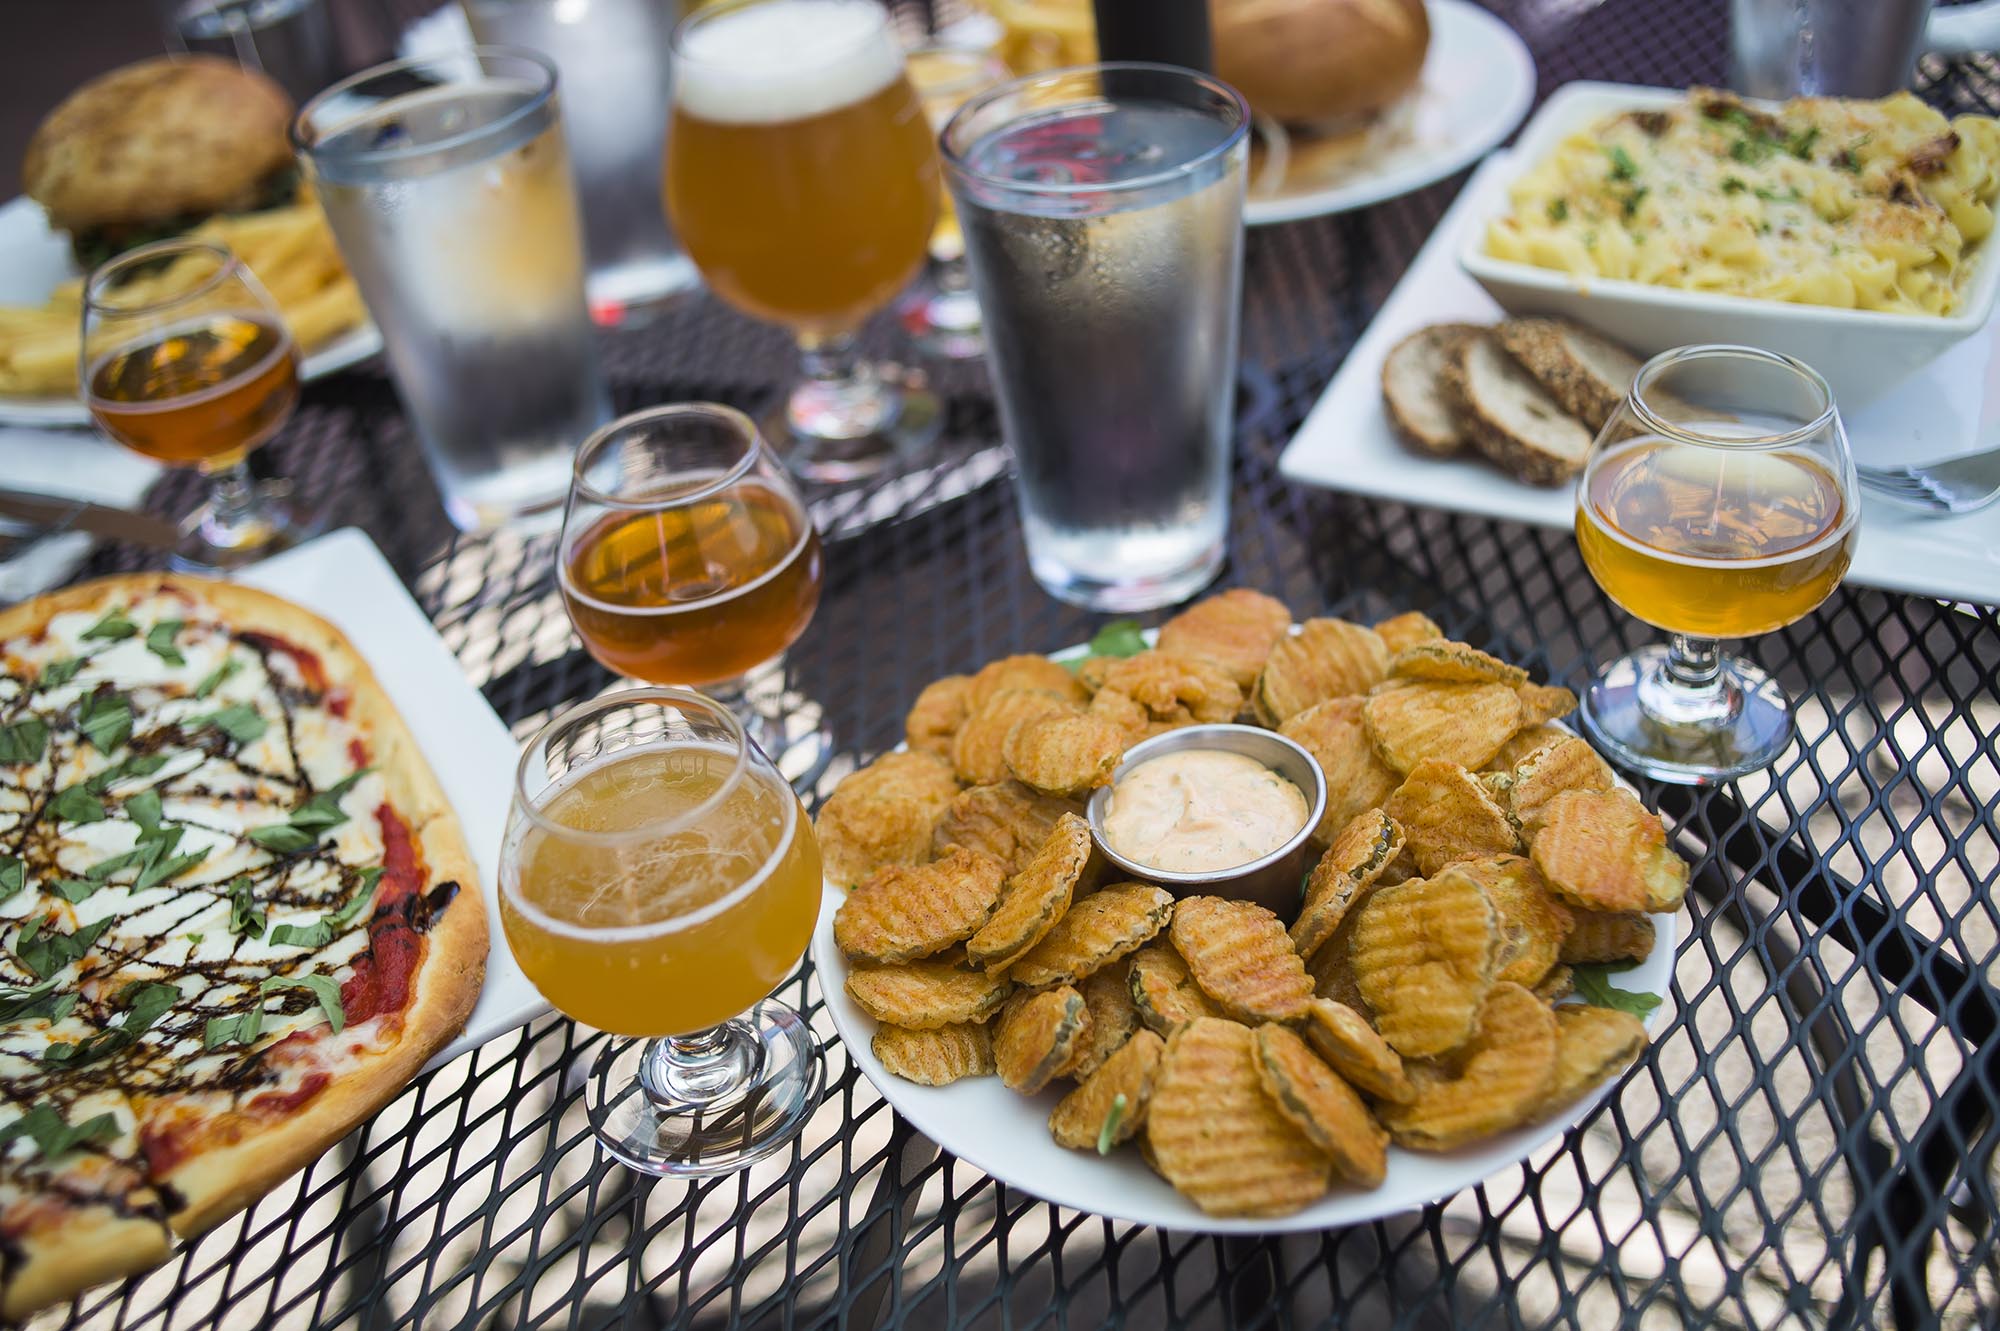 Food and beer from Airways Brewing Bistro in Kent, Washington